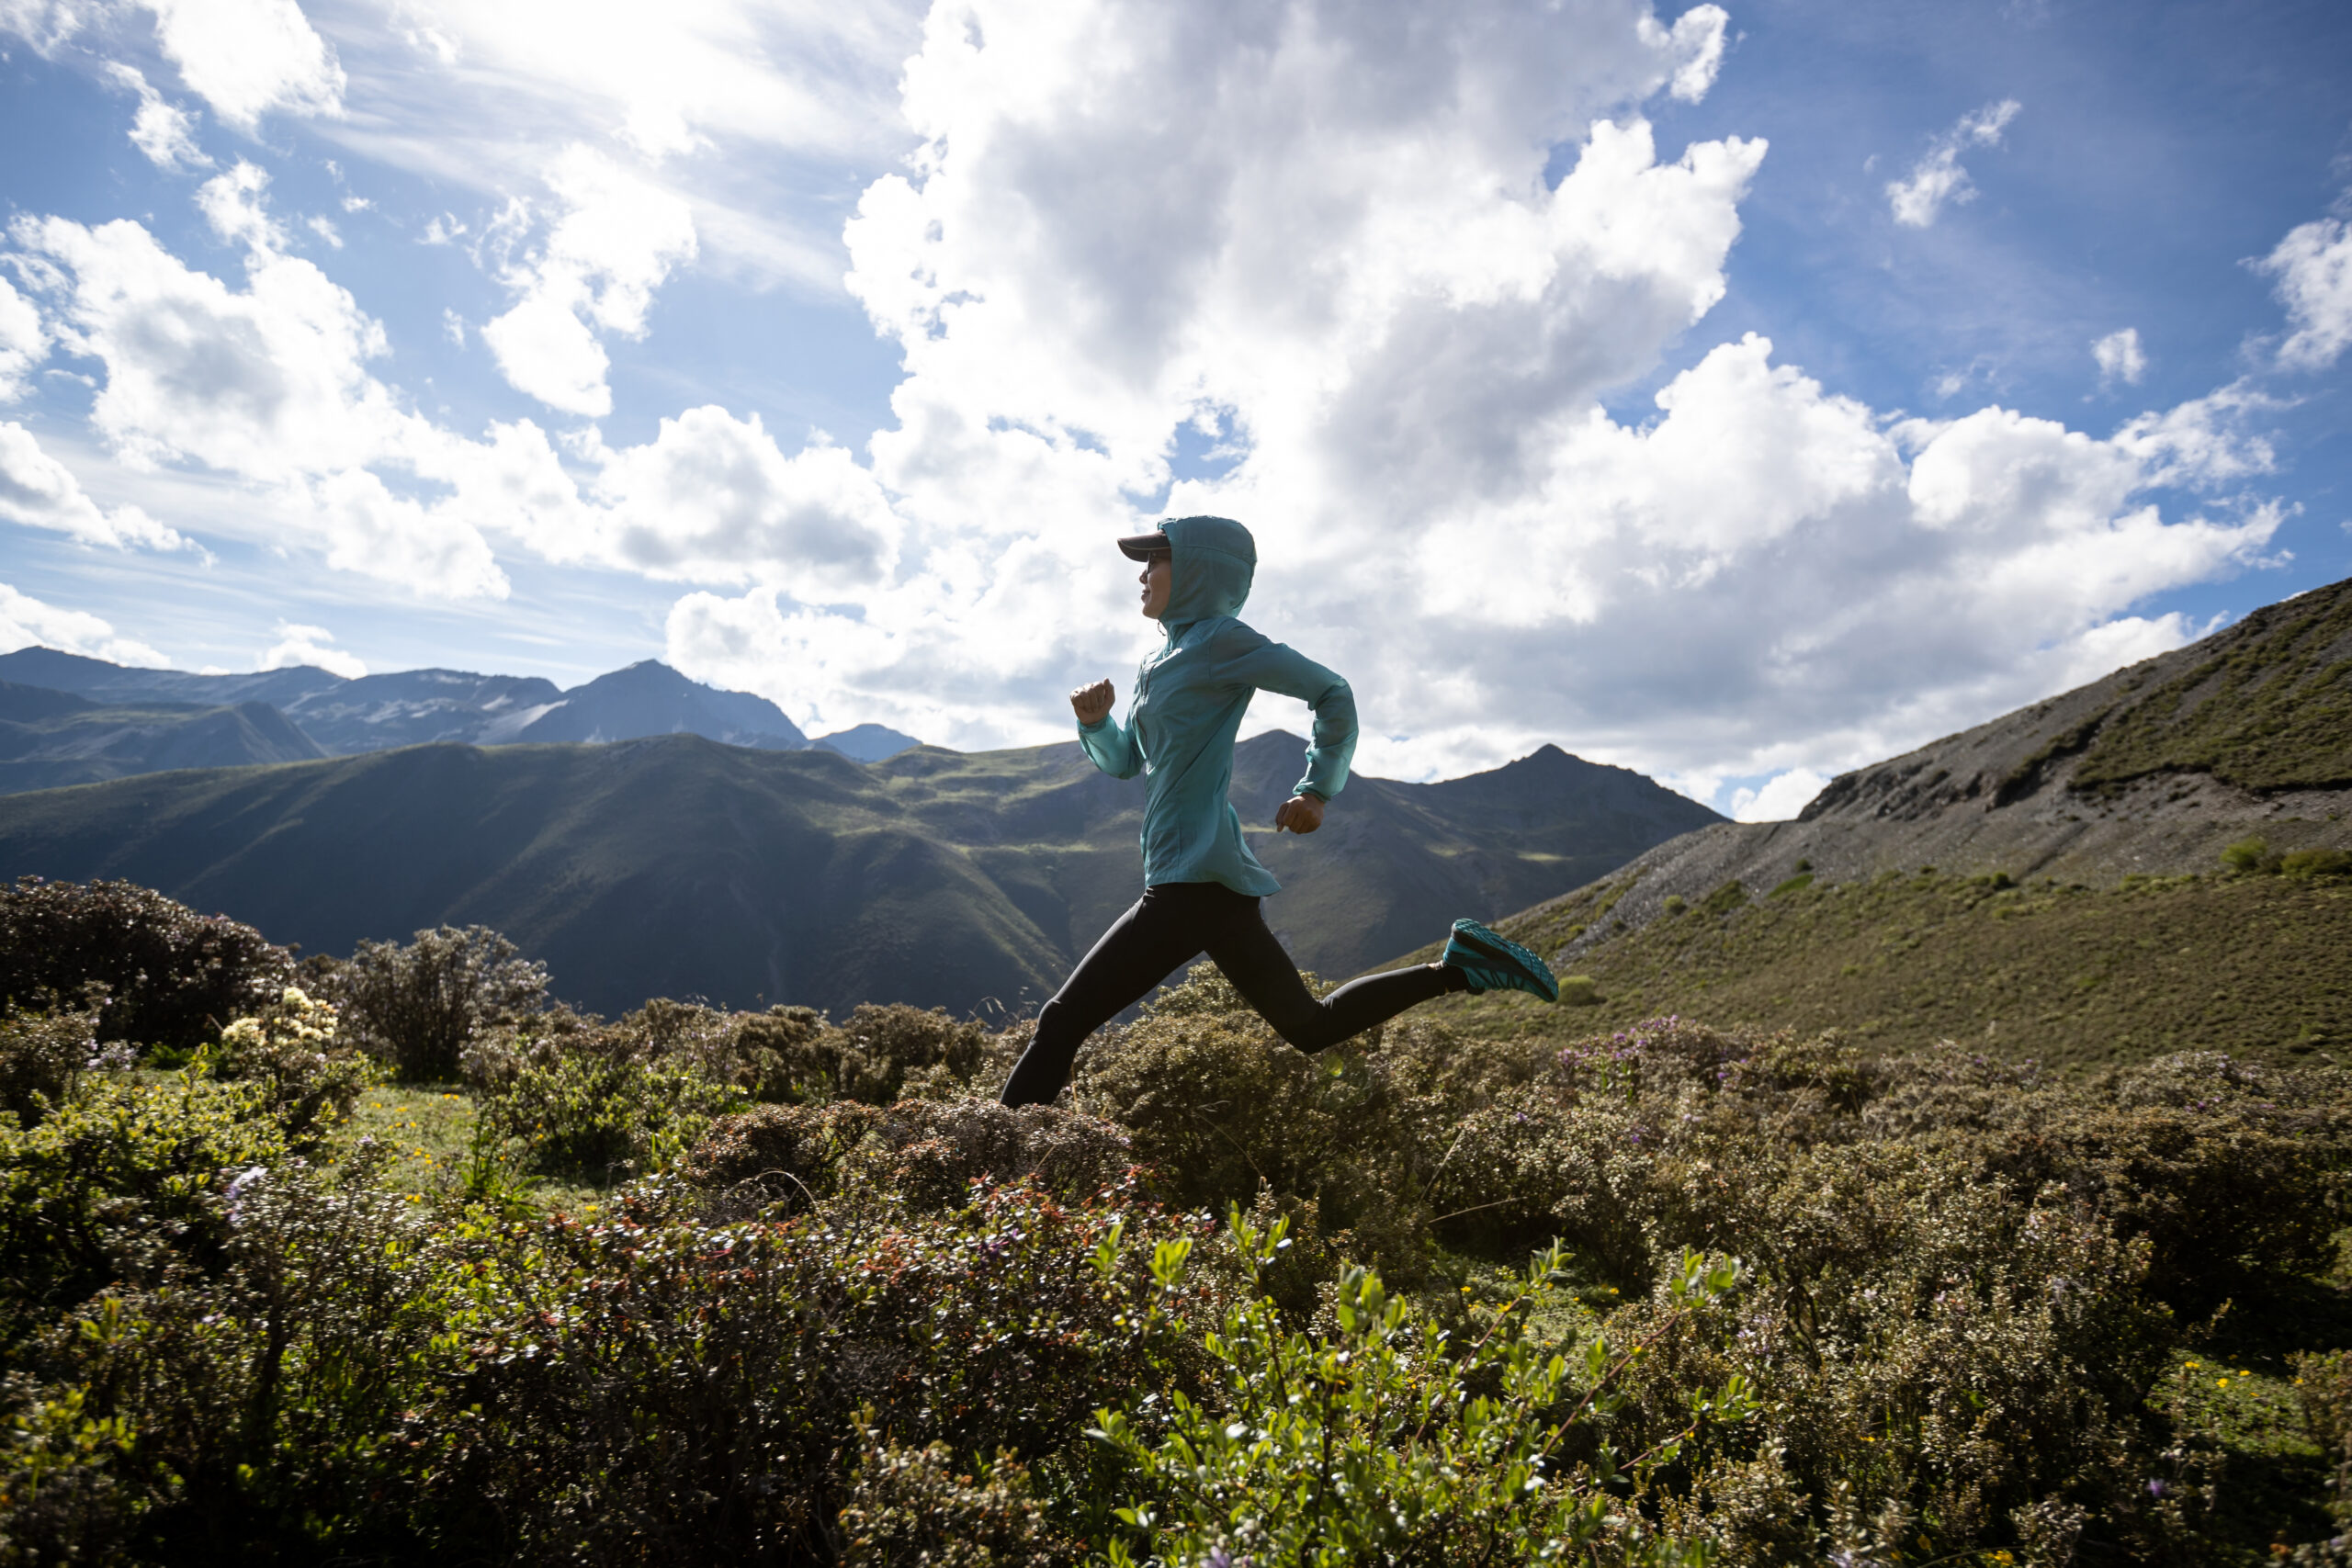 Be an Animal on The Trail in New Brooks Trail Gear - Life and